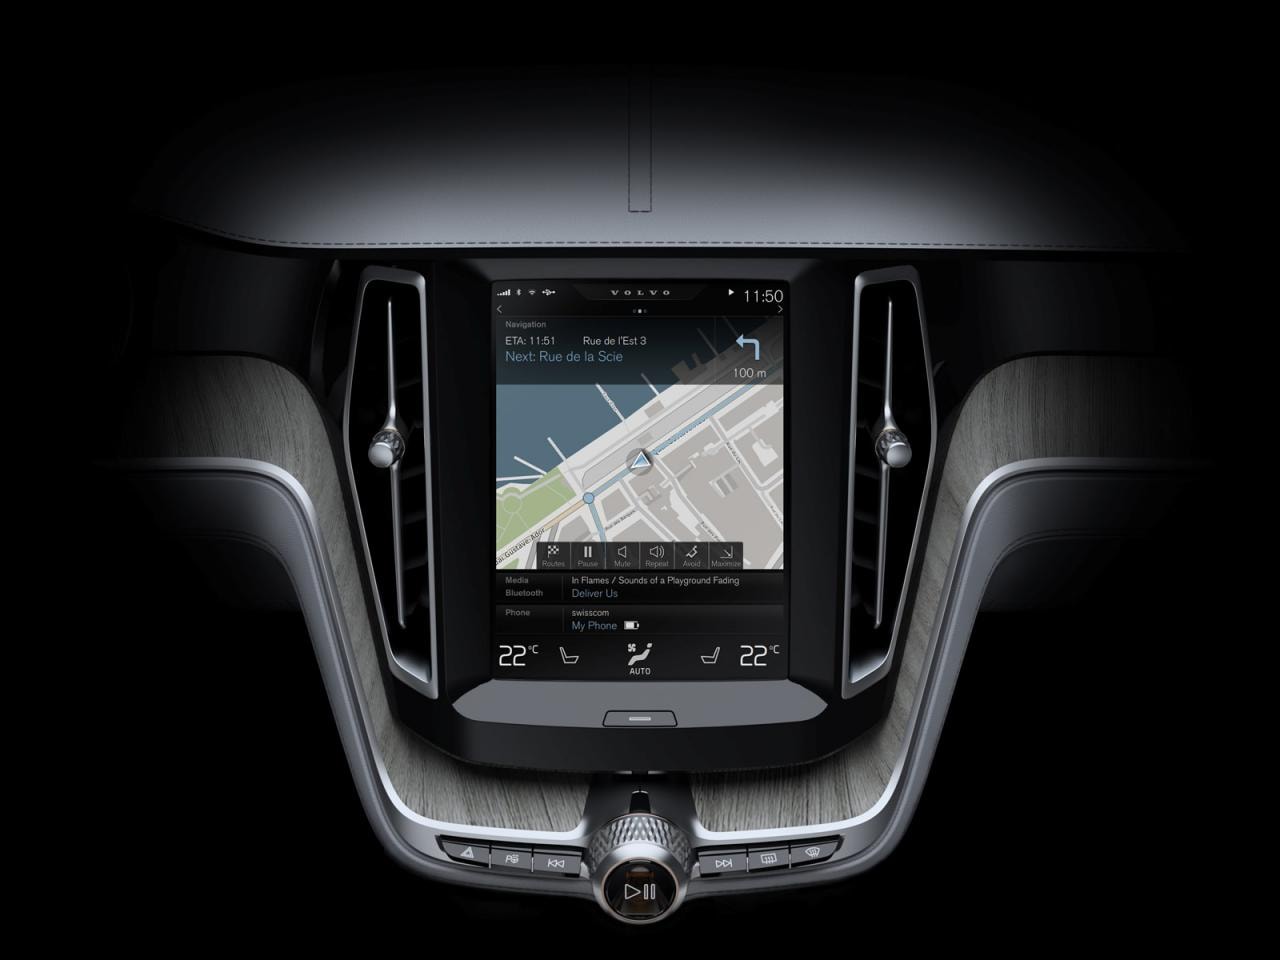 Naturally aged wood and the next generation of Volvo infotainment